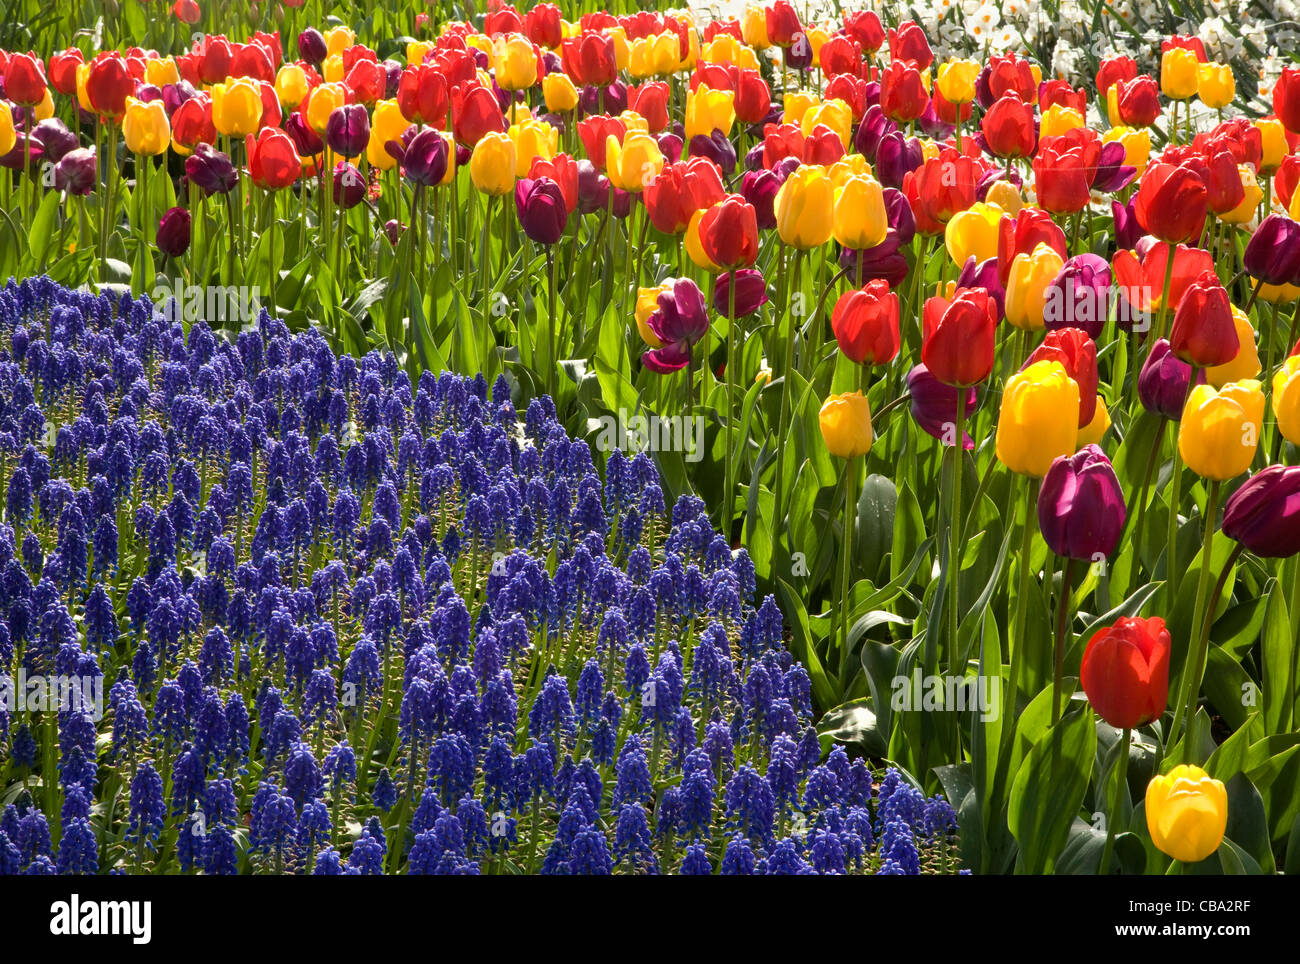 Tulips and daffodils and hyacinth blooming in the Old Garden area of Roozengaarde Flowers and Bulbs Garden in the Skagit Valley. Stock Photo